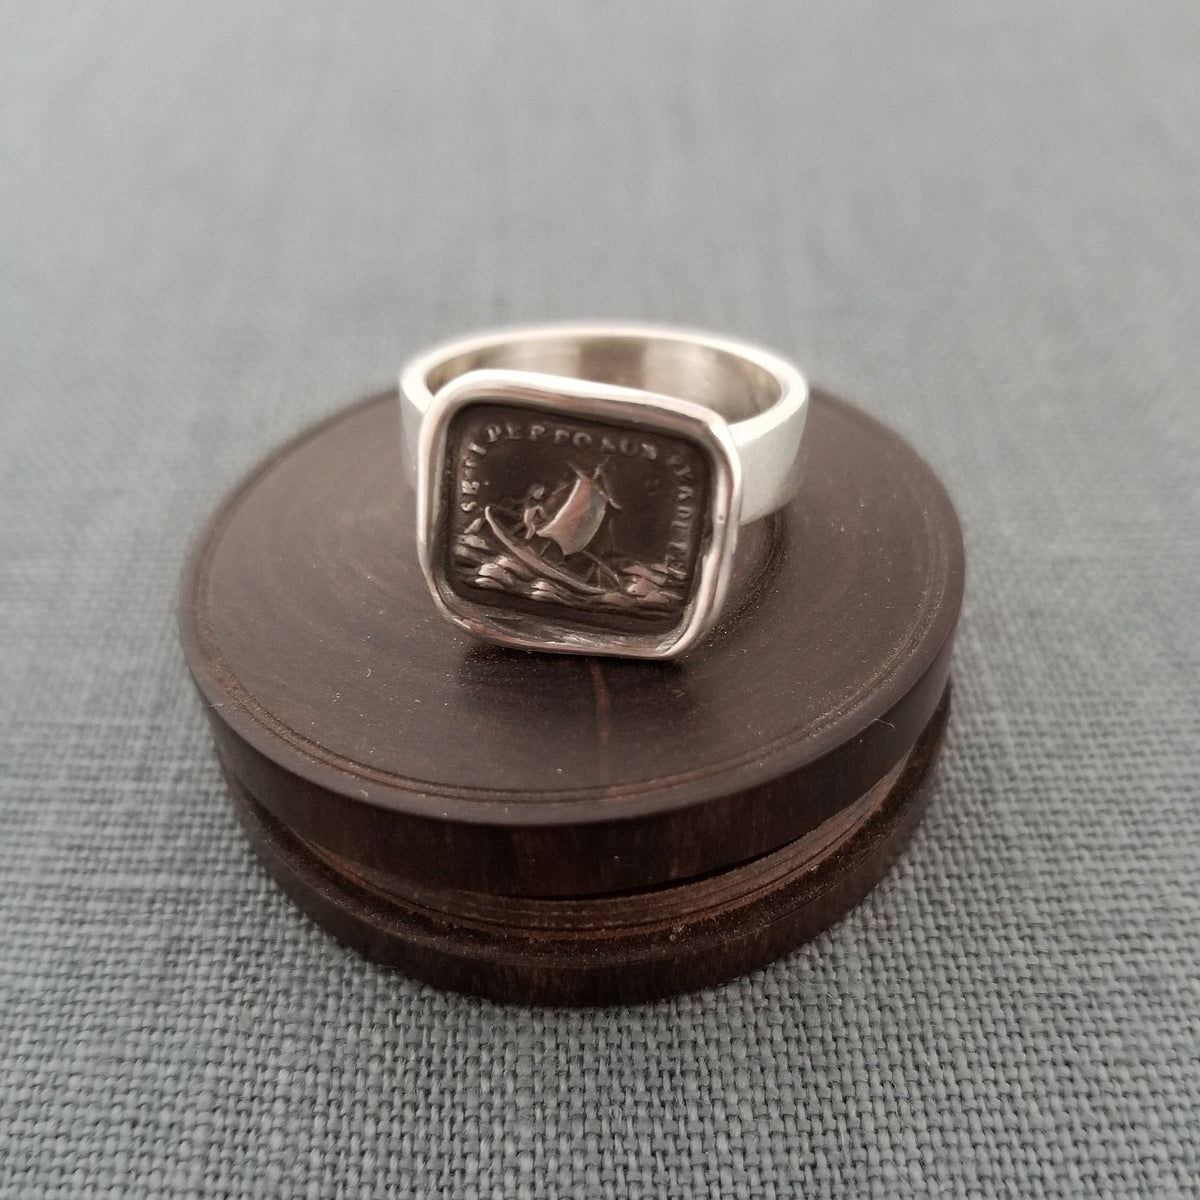 Secret - Bees and Beehive Wax Seal Wax Seal Ring 118 - Plum and Posey